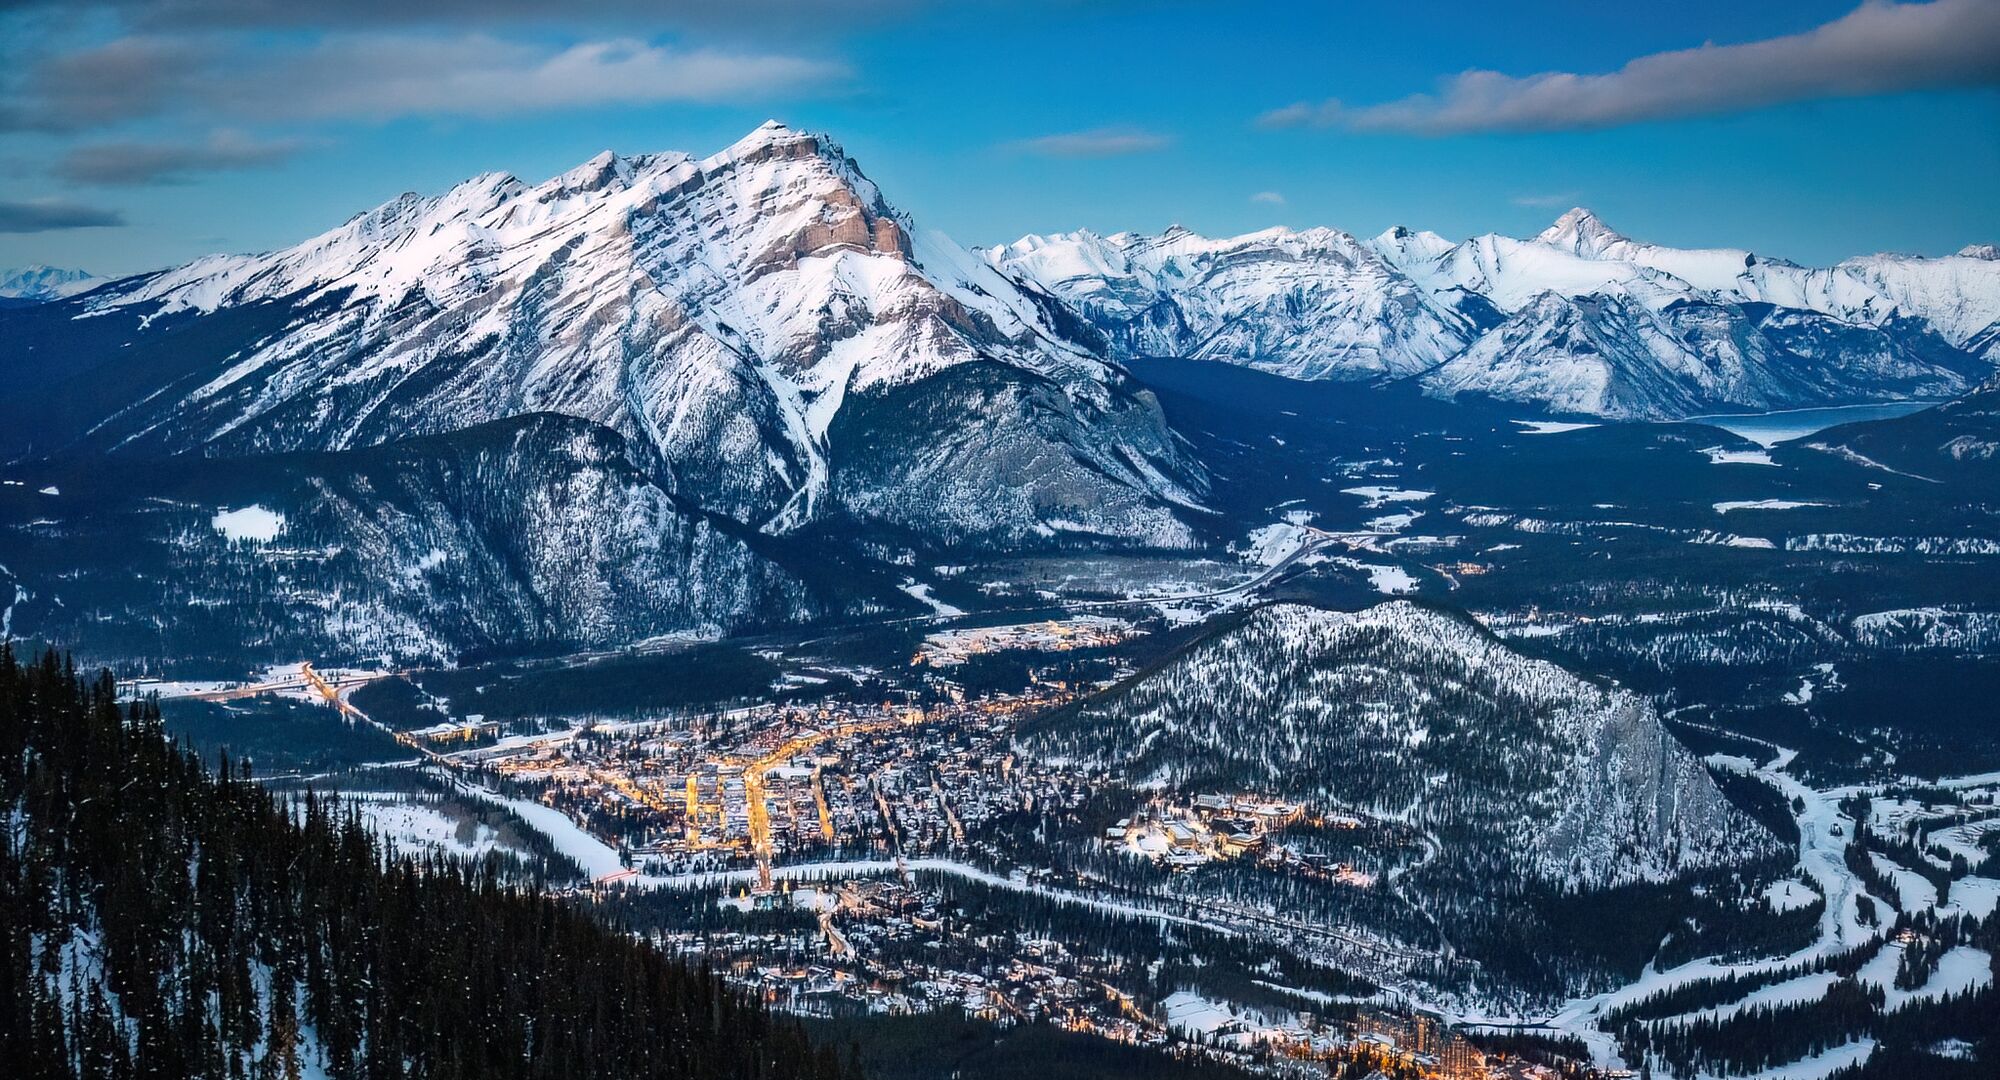 The Banff Townsite light up at night as seen from the BAnff Gondola on top of Sulphur Mountain with Cascade Mountain looming in the background in Banff NAtional PArk.